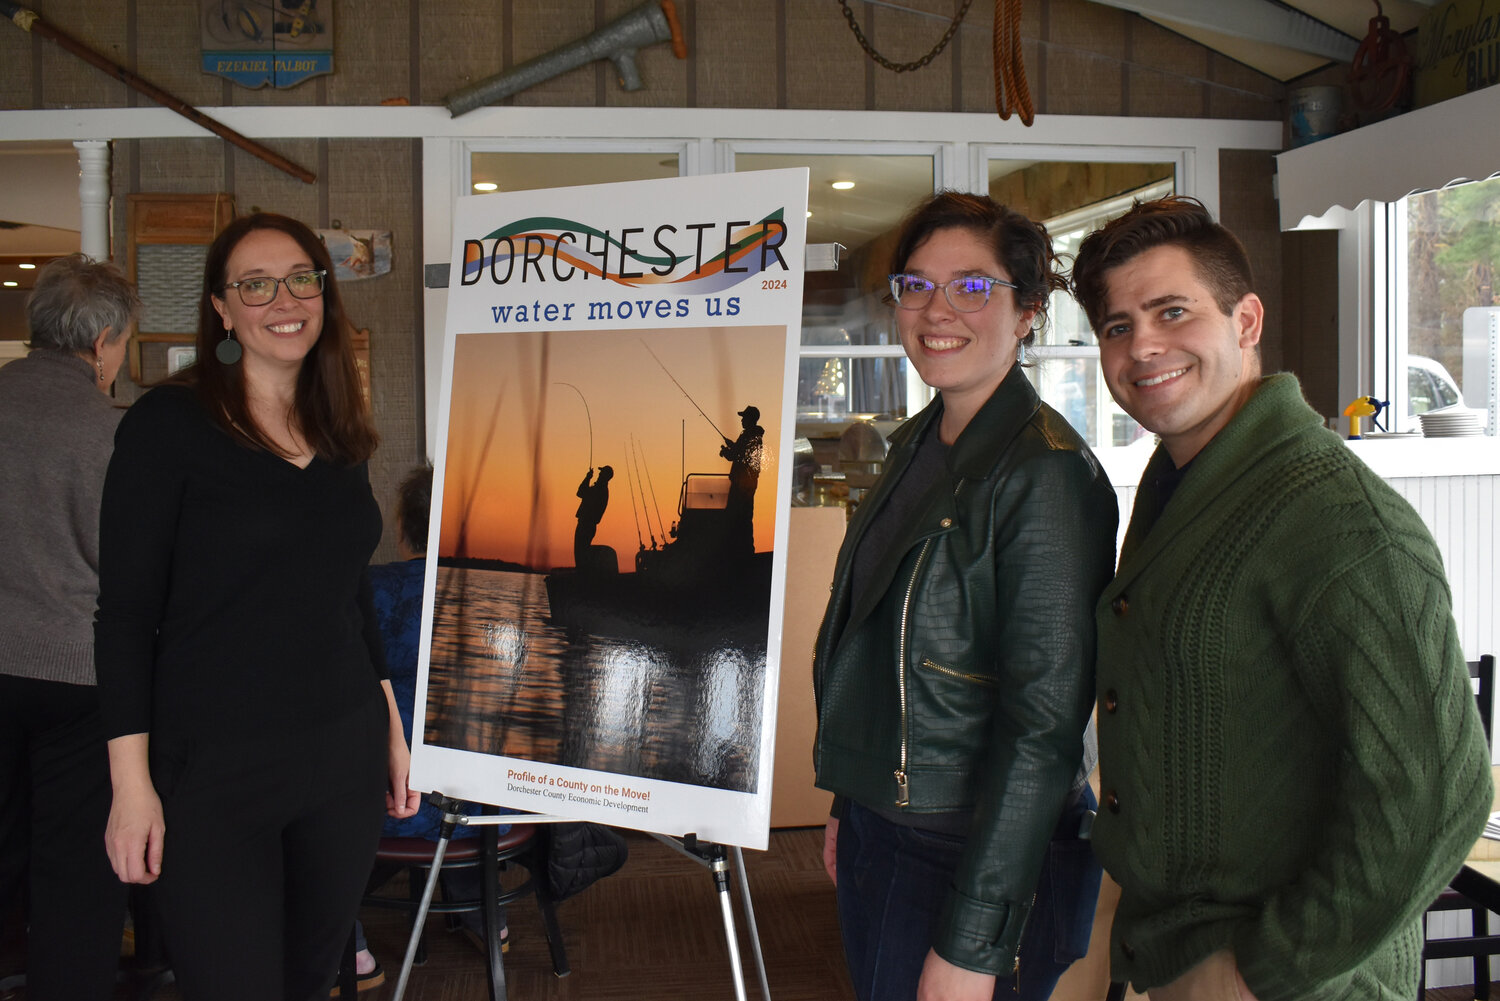 Economic Development Director Susan Banks, Editor Laura Walter and Creative Director Tom Maglio at the Dorchester Water Moves Us event in 2024.